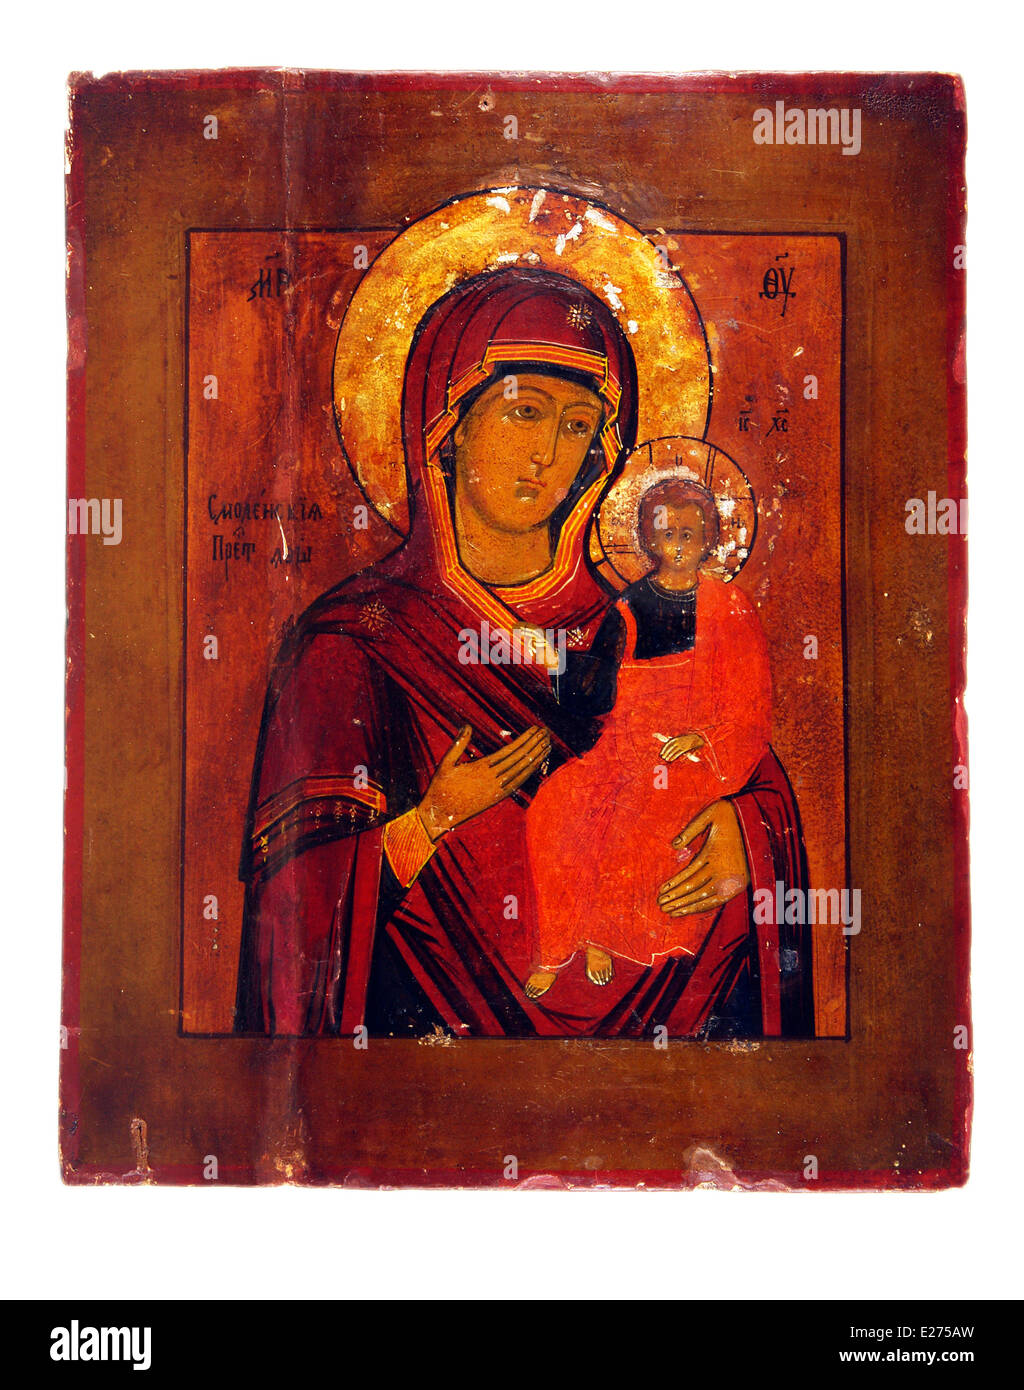 Ancient church icon. One of attributes of religion Stock Photo